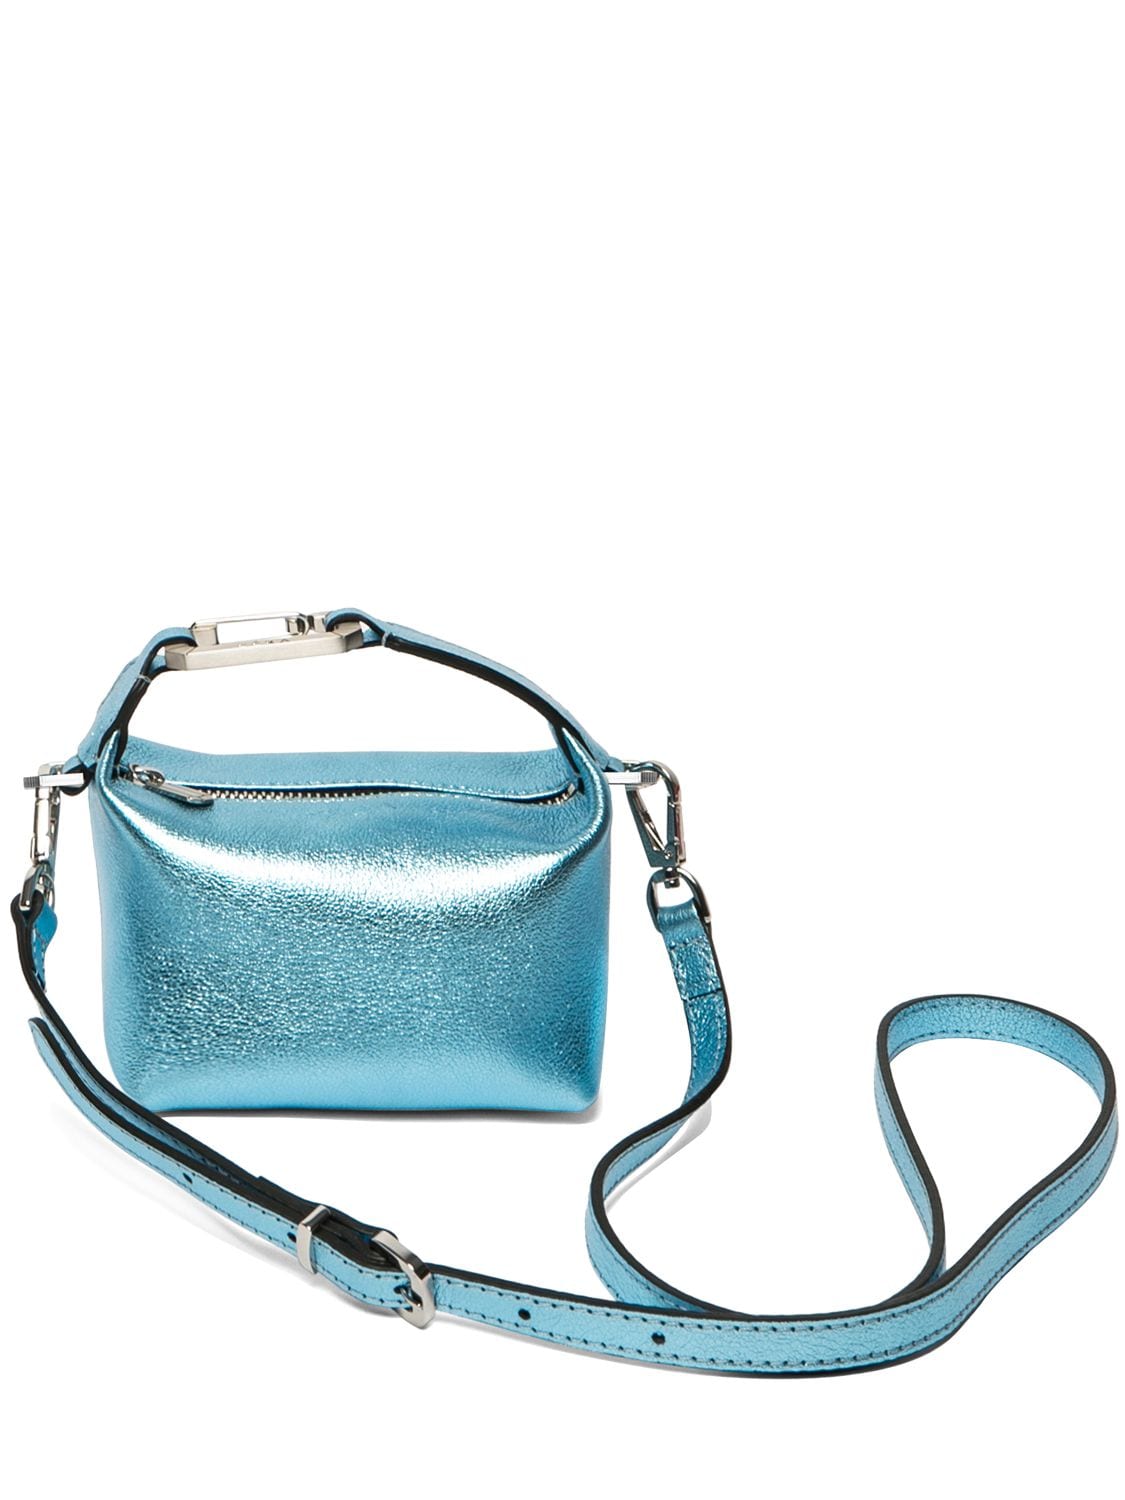 Eéra Tiny Moon Laminated Leather Bag In Turquoise